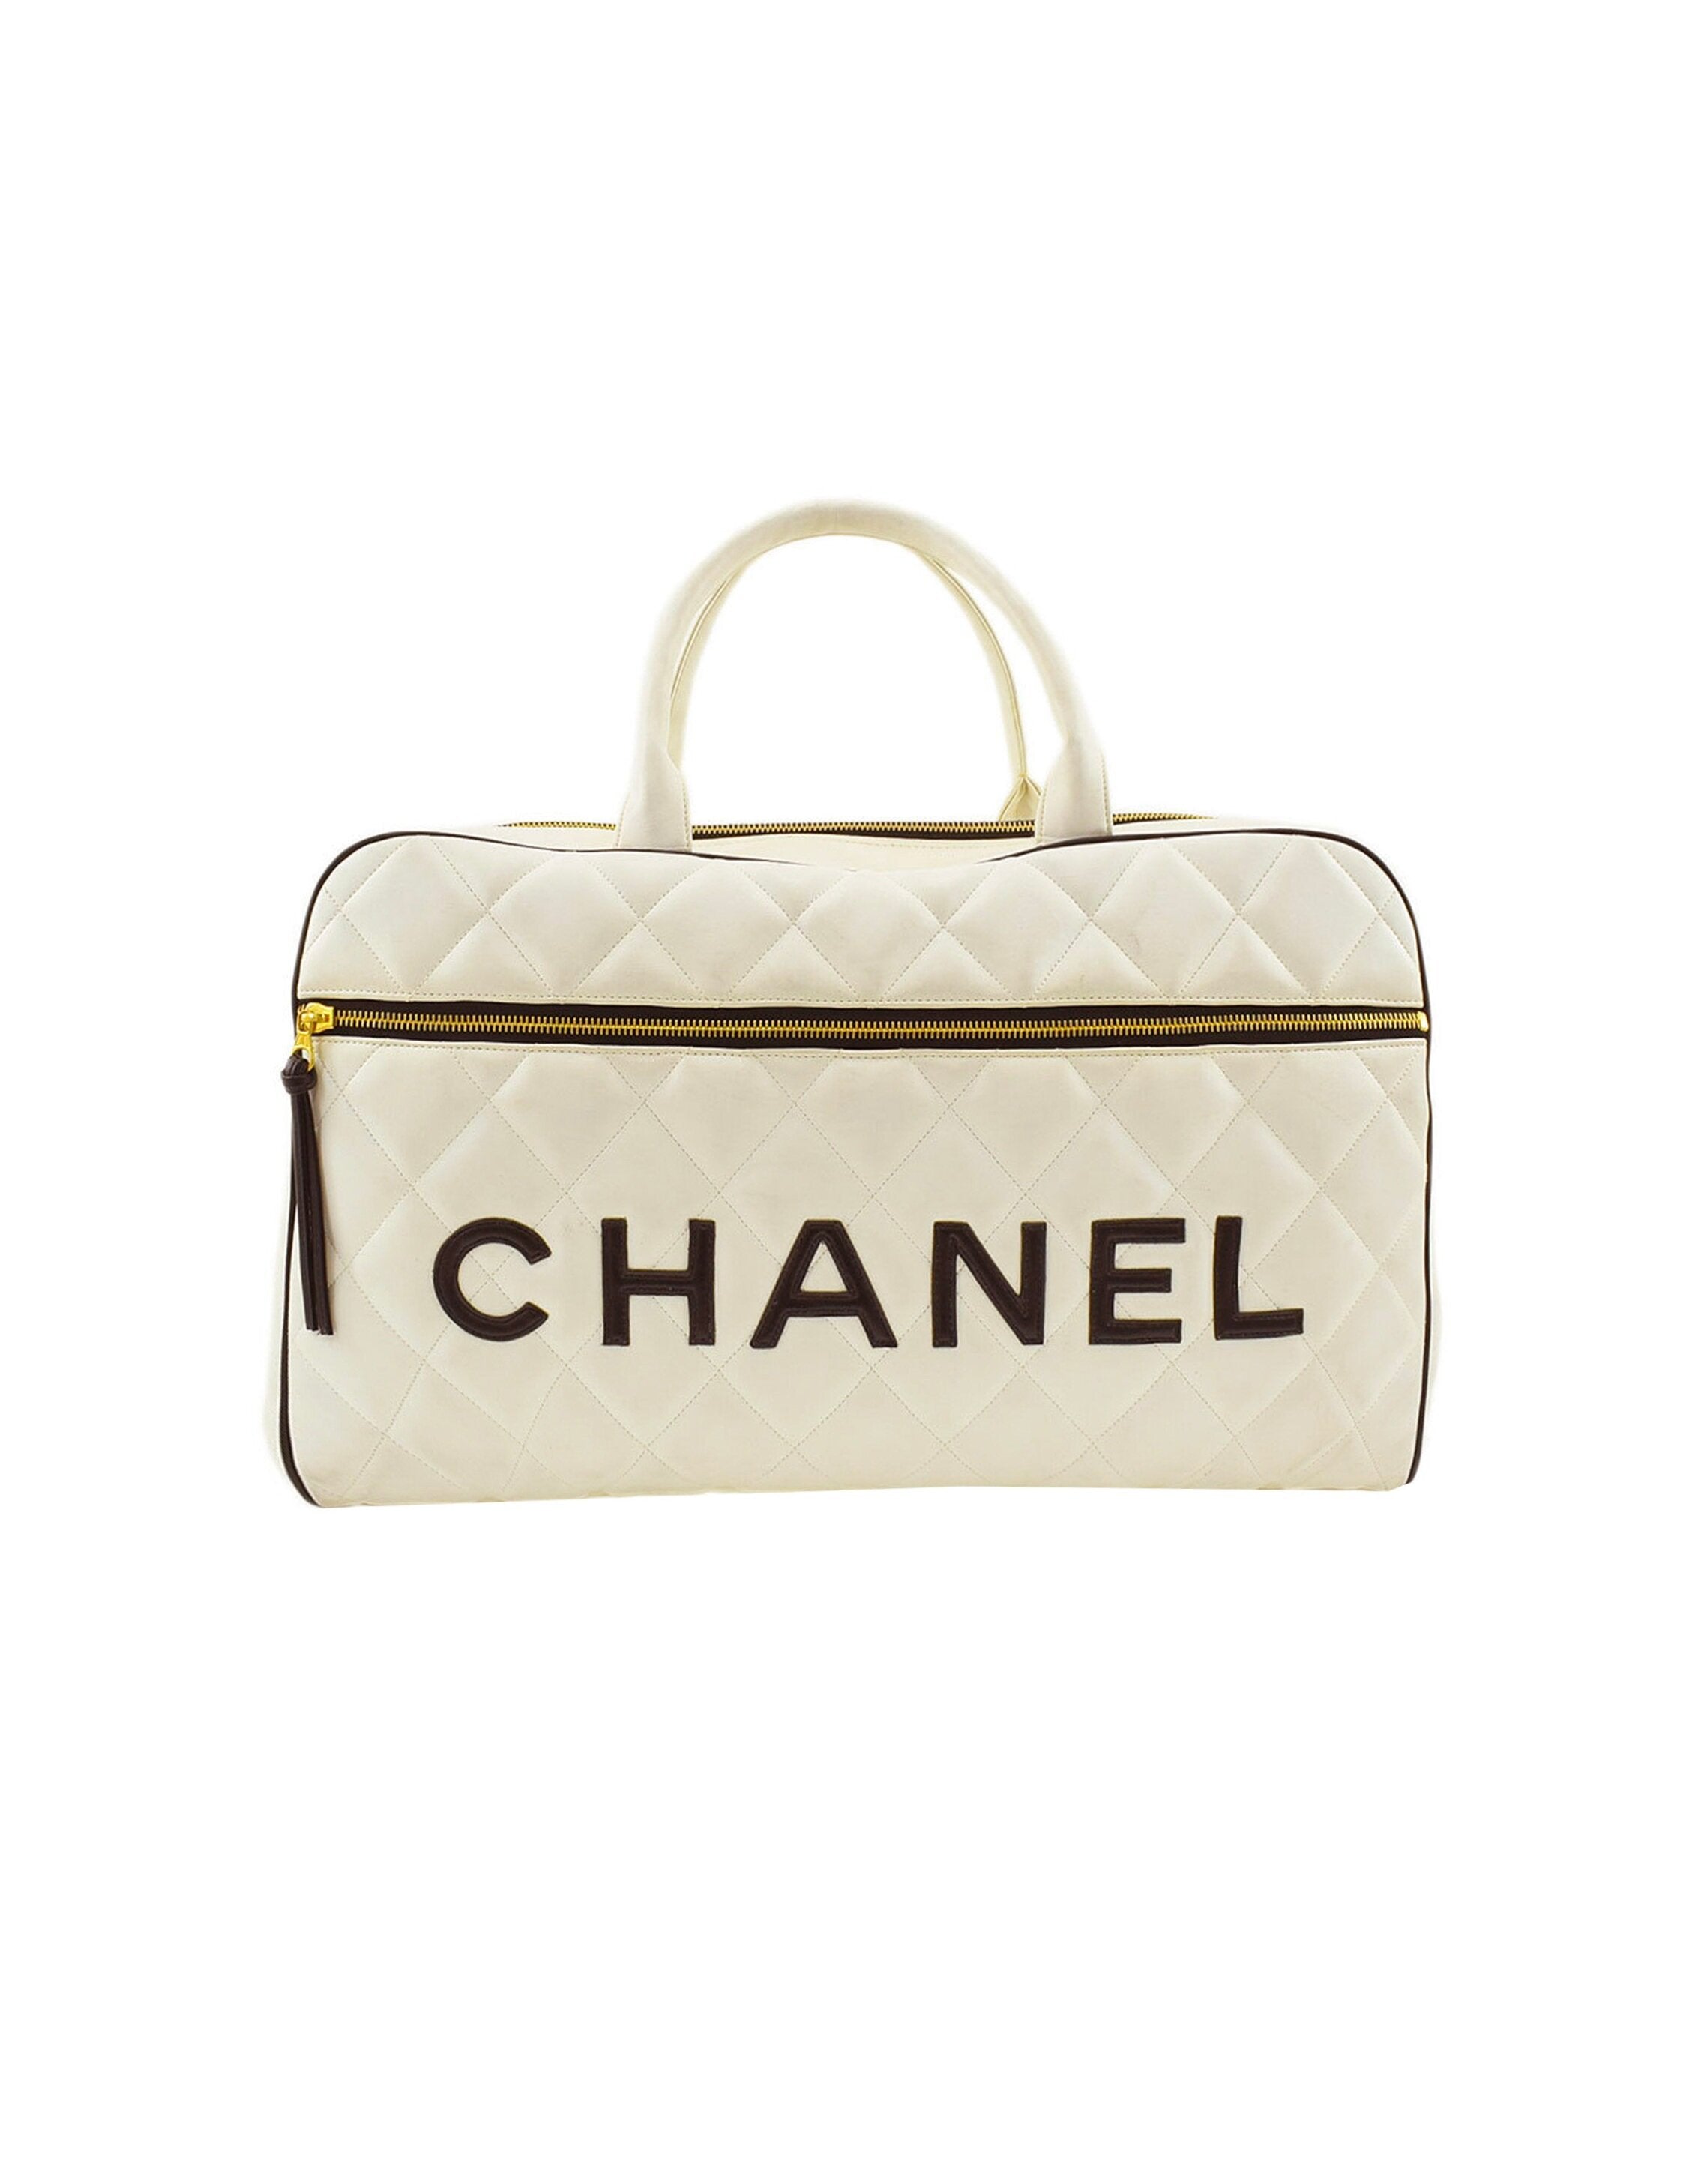 Chanel Limited Edition Vintage Duffel Tote Black and White Leather Weekend  Bag